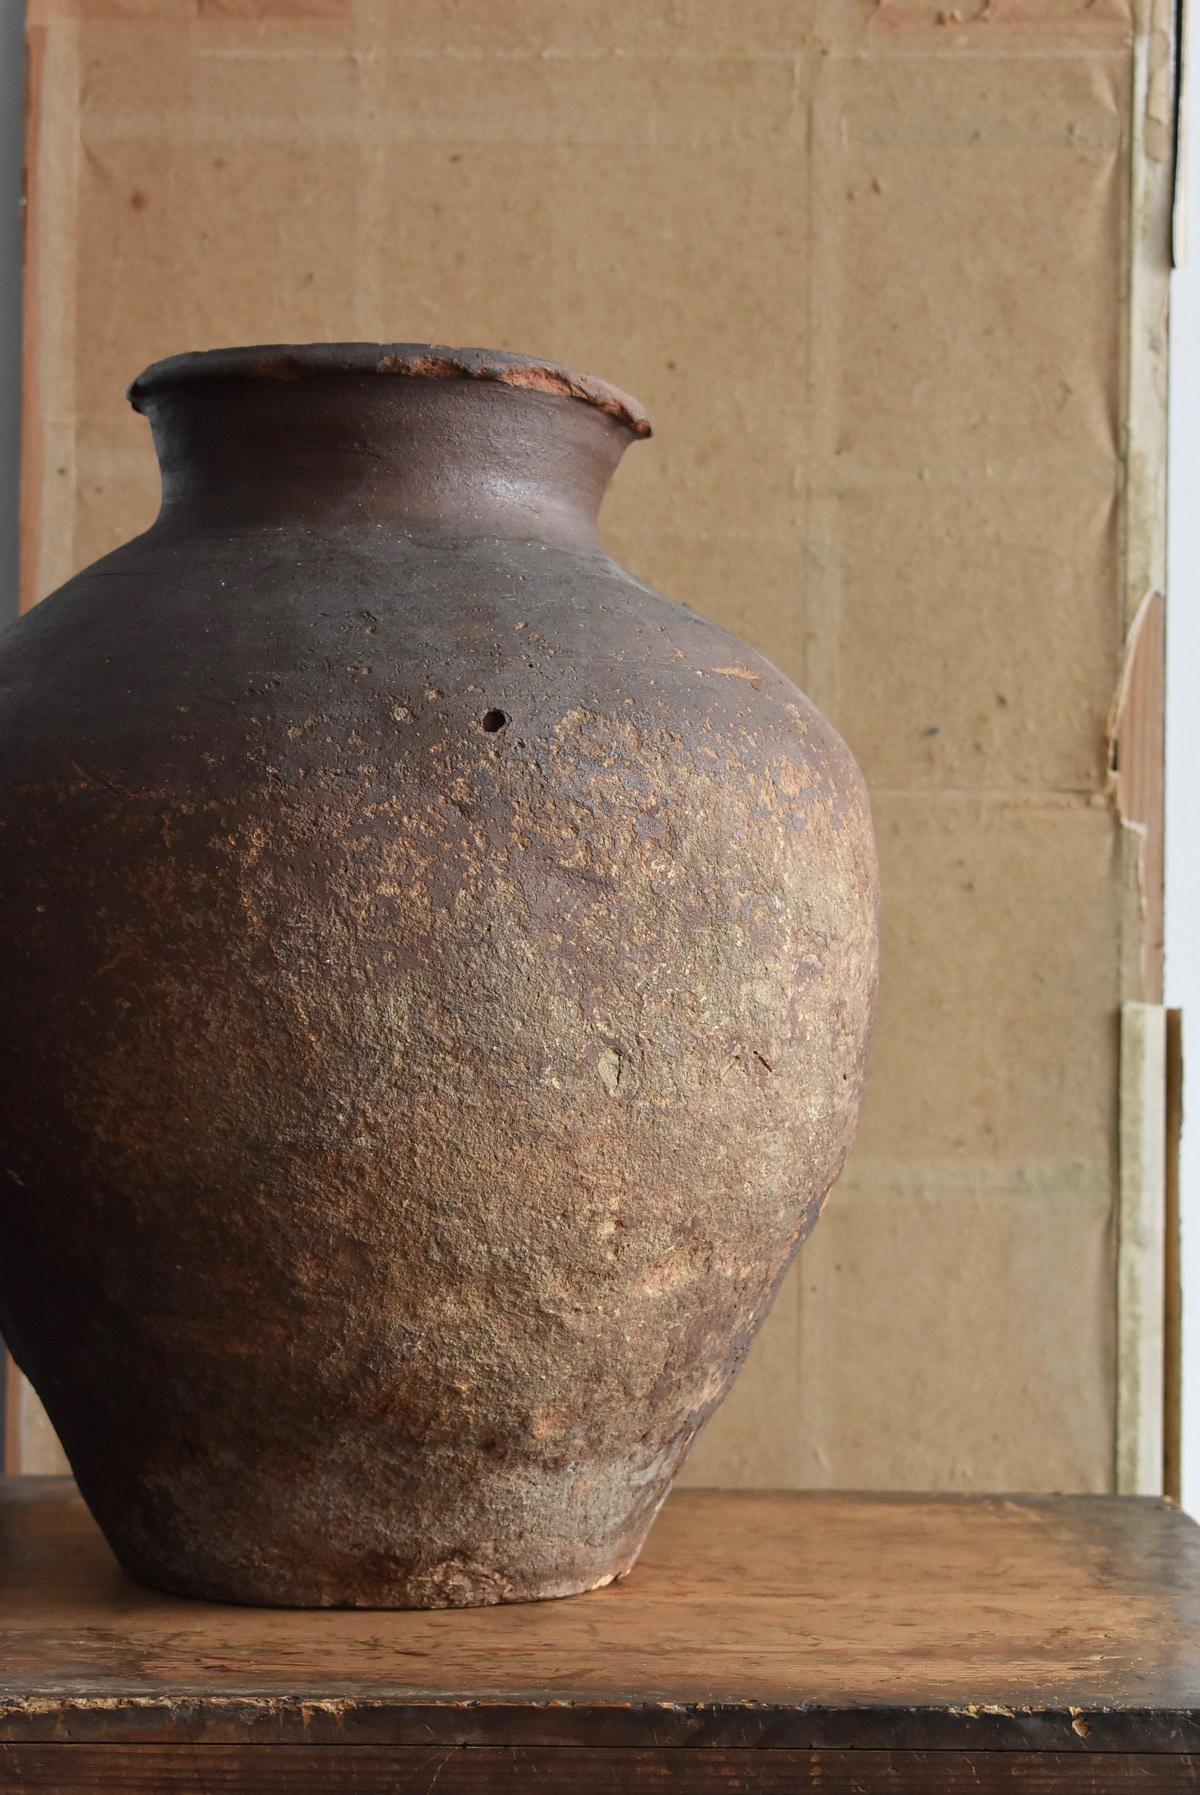 It is a very old jar in Japan.
This is a pottery called Tokoname ware.
Tokoname is a kiln located in Aichi prefecture, Japan.
It is said to have originated around the 12th century.
Also, in Japan, there are 6 kilns with a long history that are still